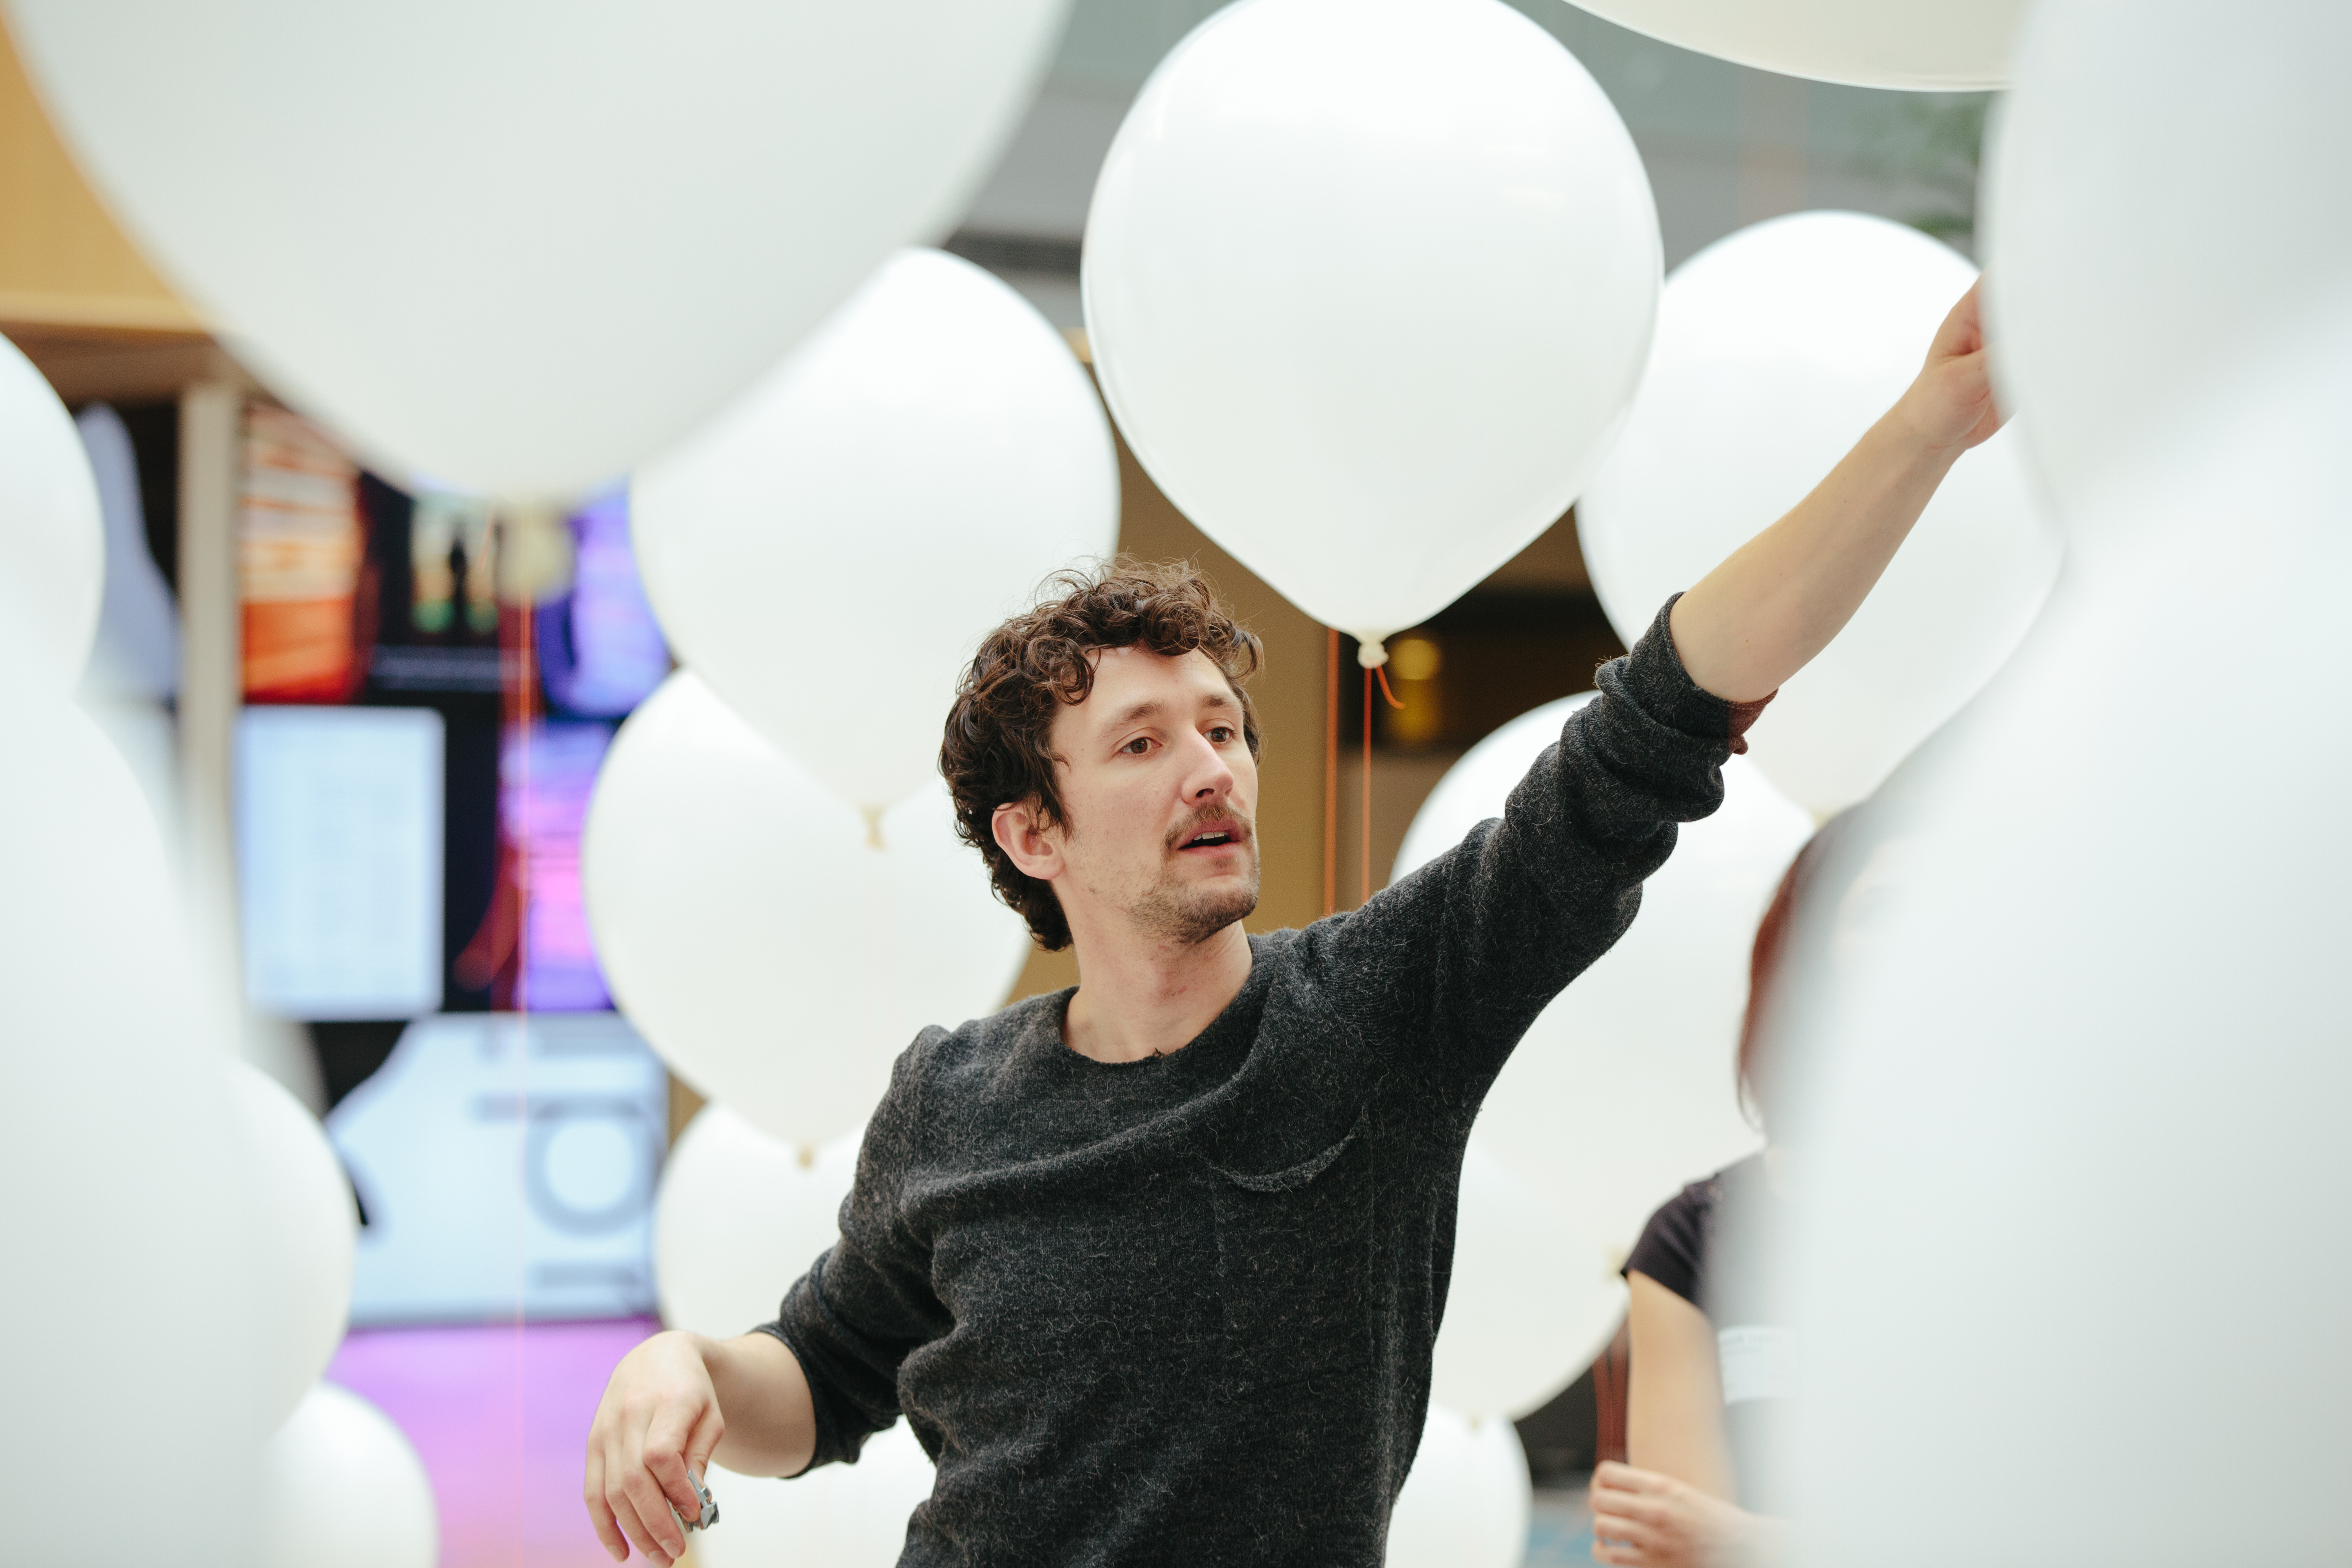 Artist with balloons